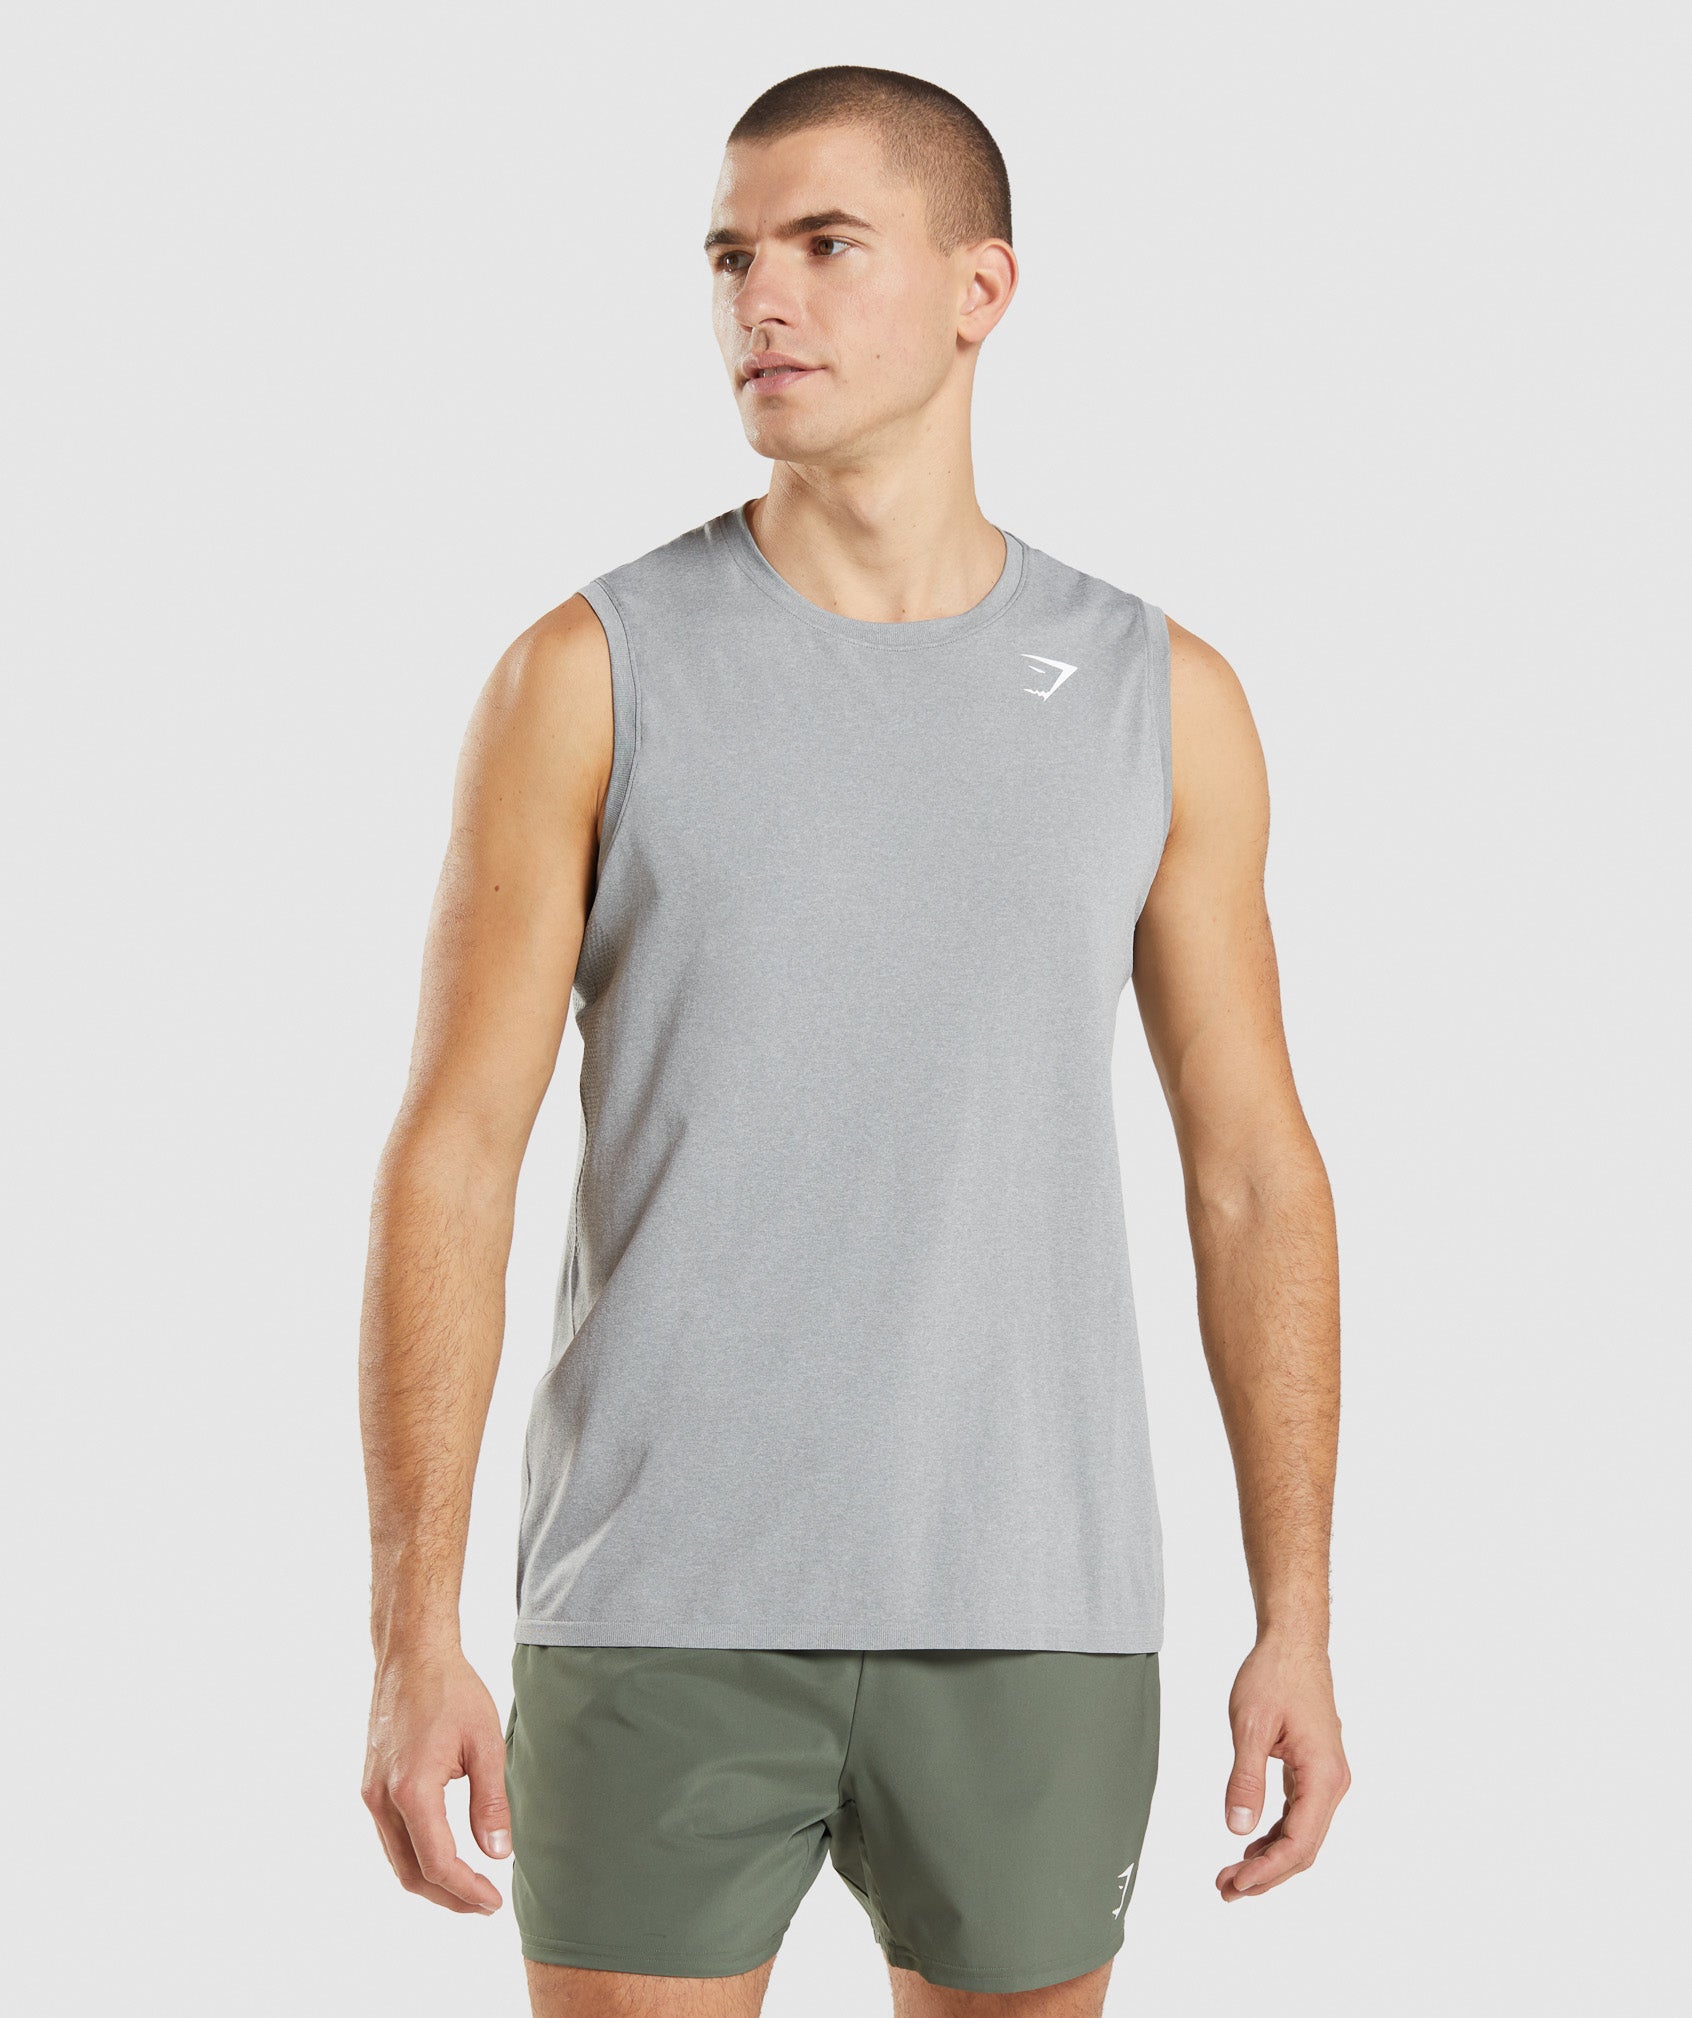 Arrival Seamless Tank in Grey - view 1